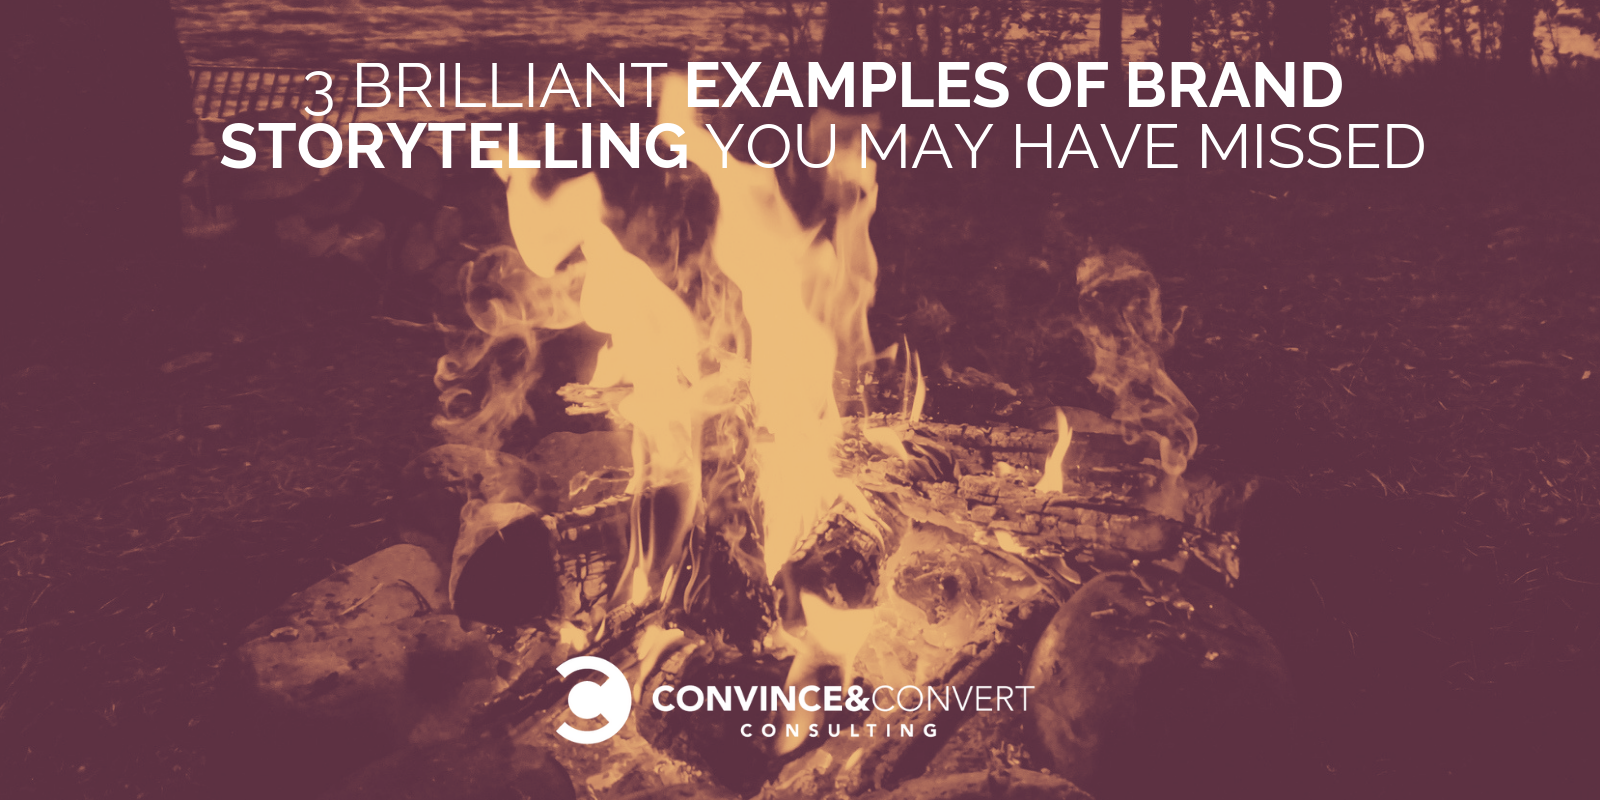 3 Brilliant Examples of Brand Storytelling You May Have Missed